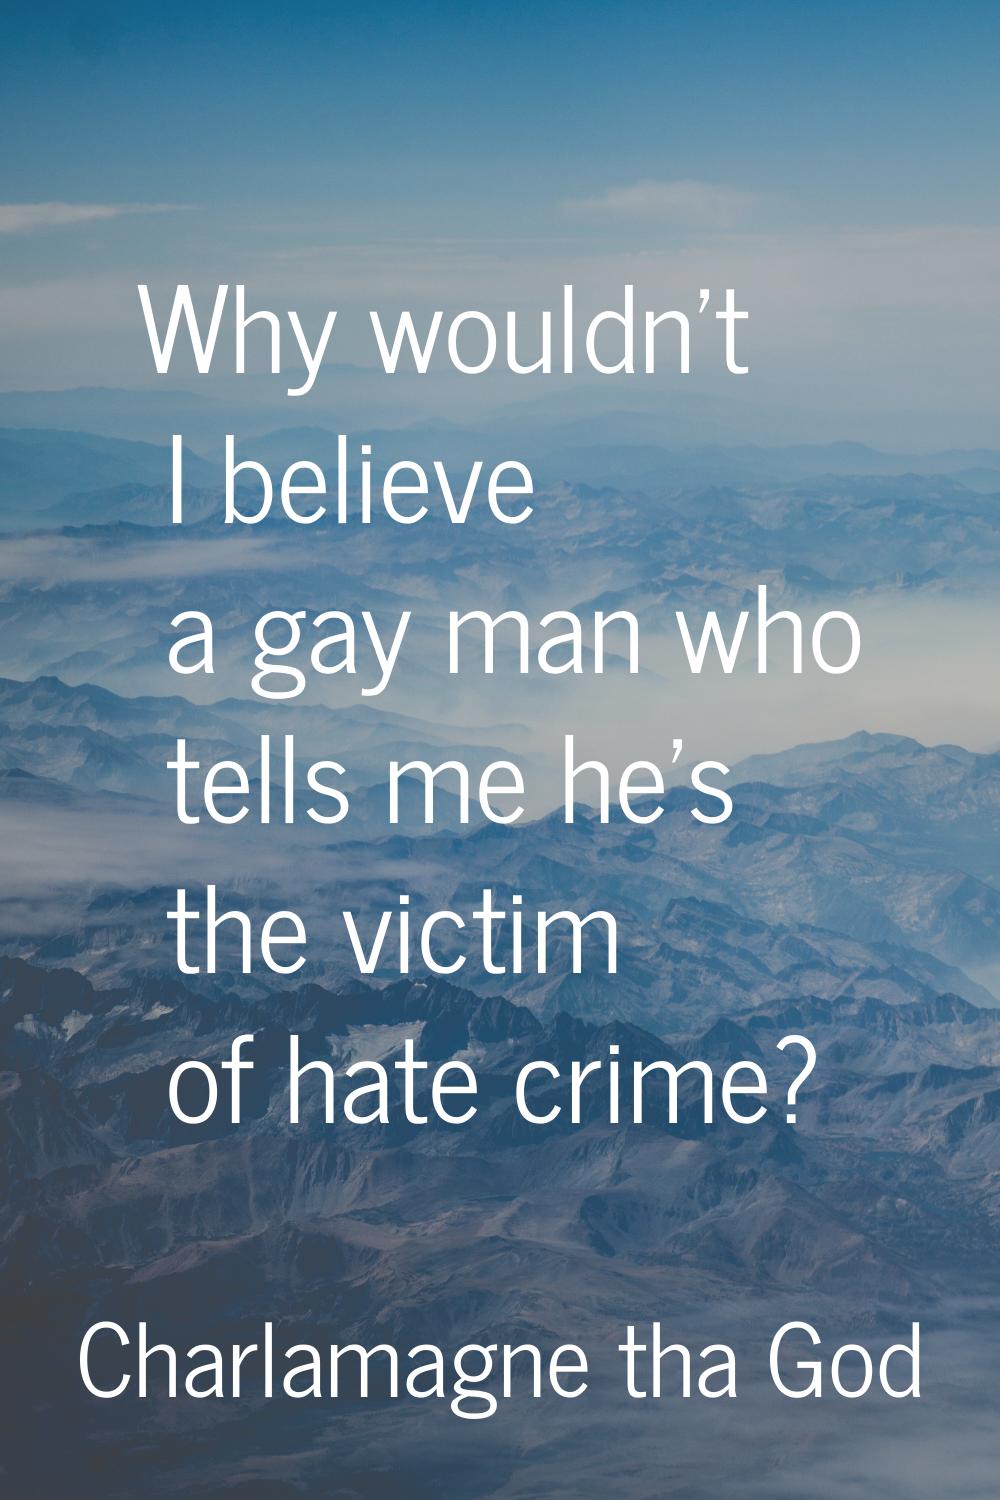 Why wouldn't I believe a gay man who tells me he's the victim of hate crime?